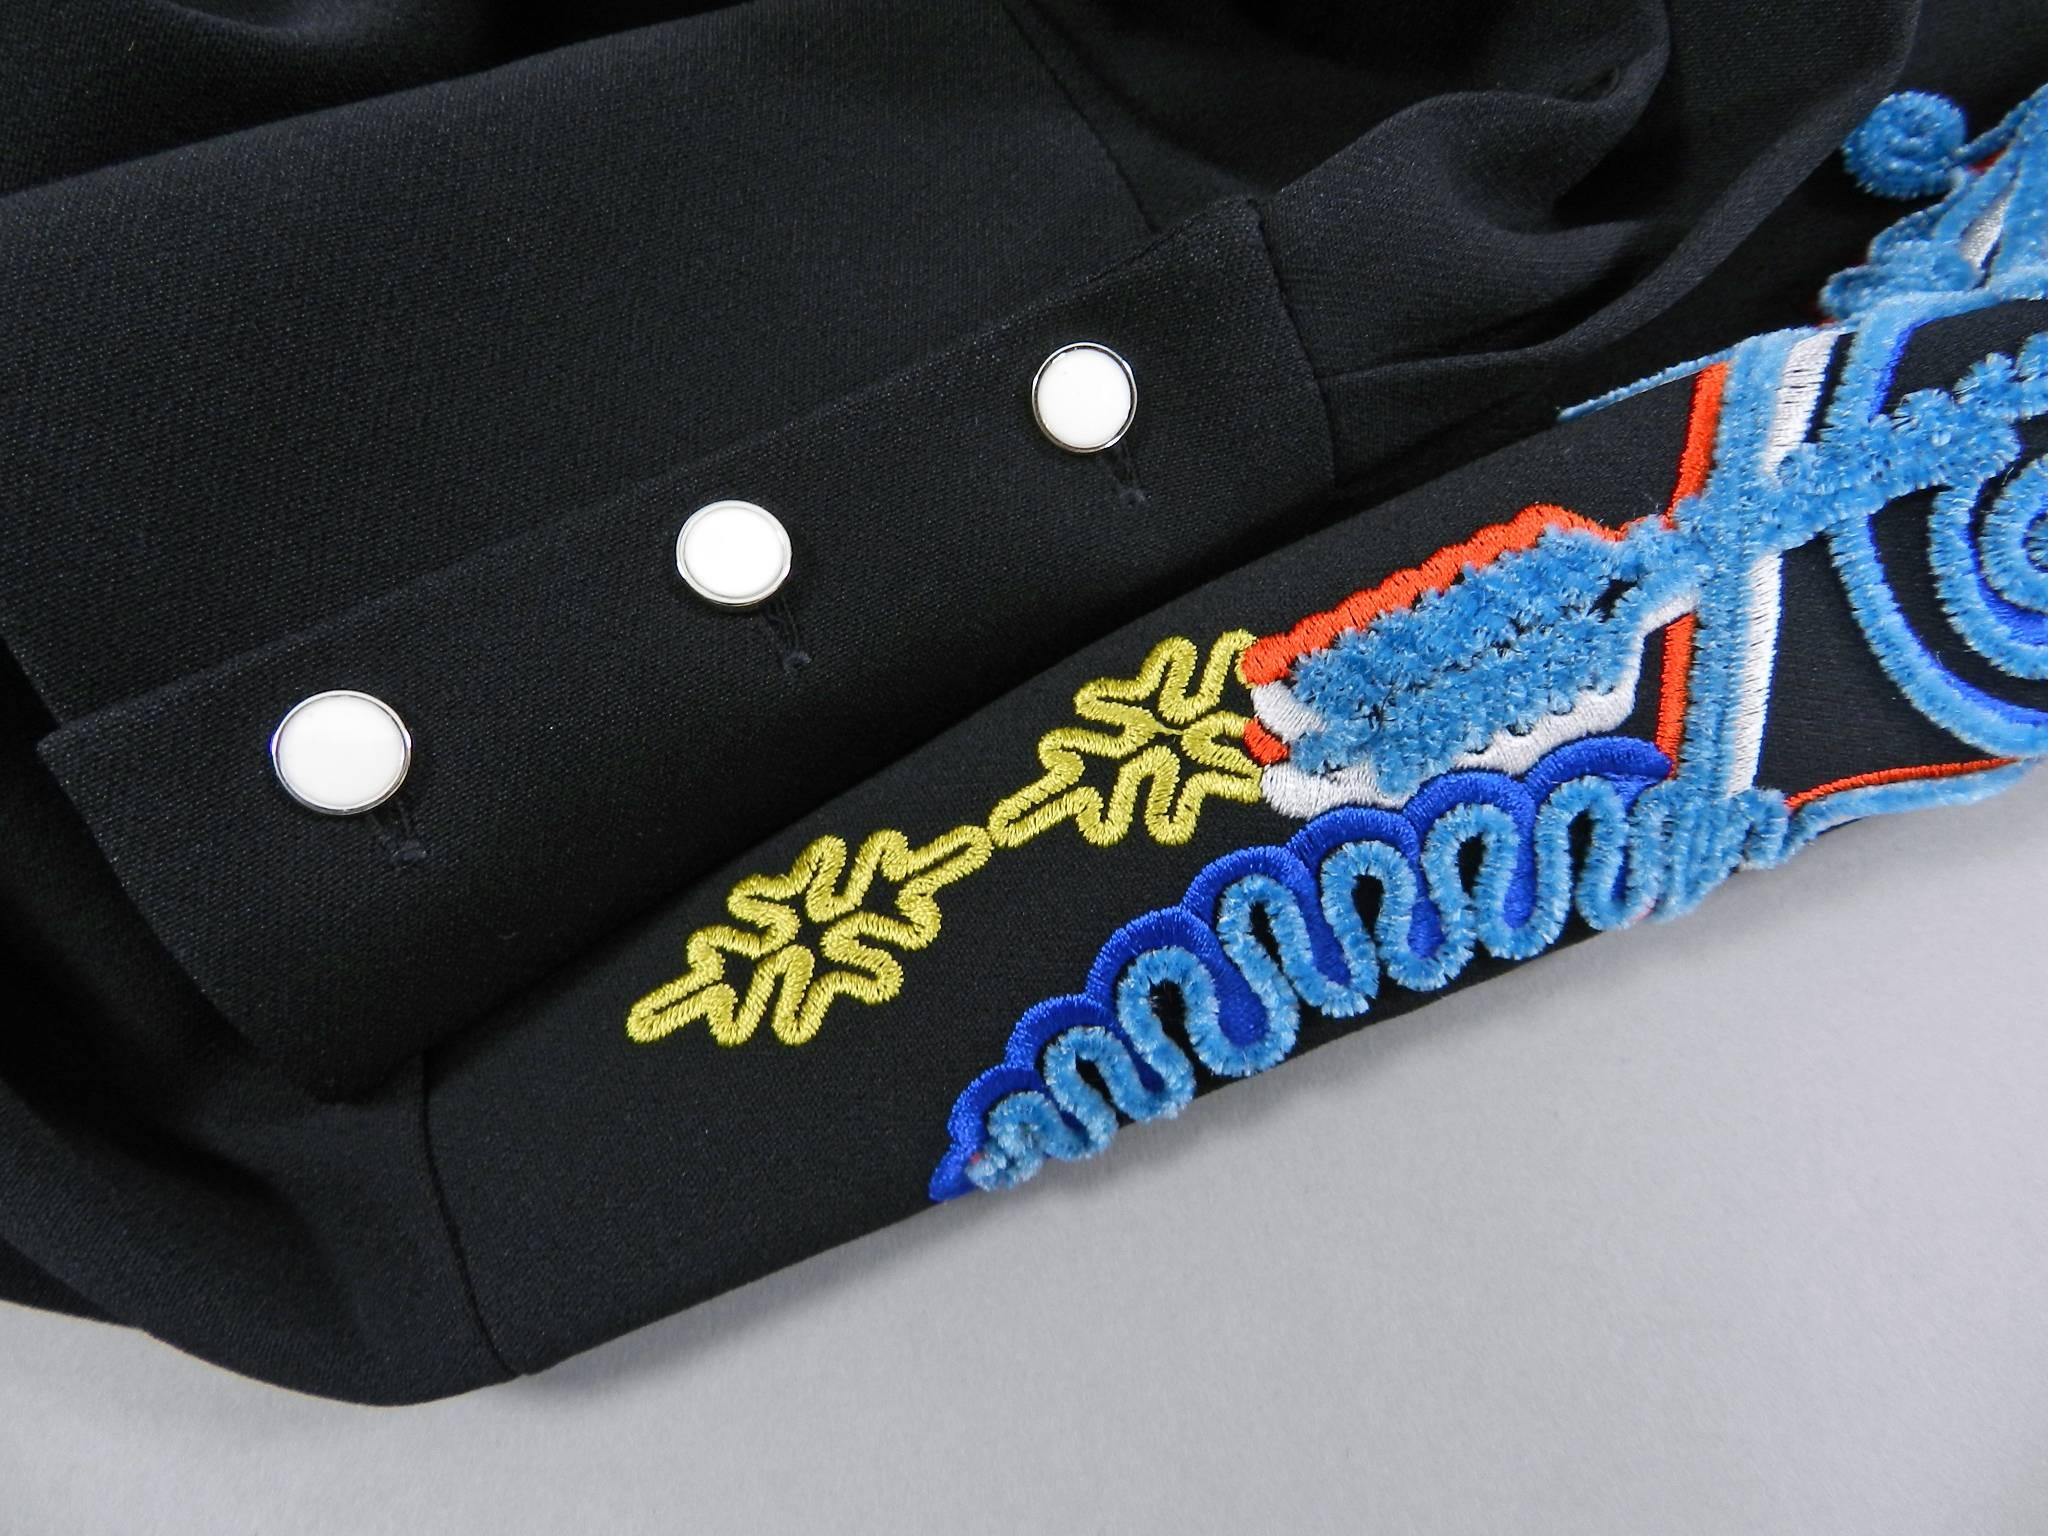 Peter Pilotto Fall 2016 Runway Western Style Embroidery Dress 3